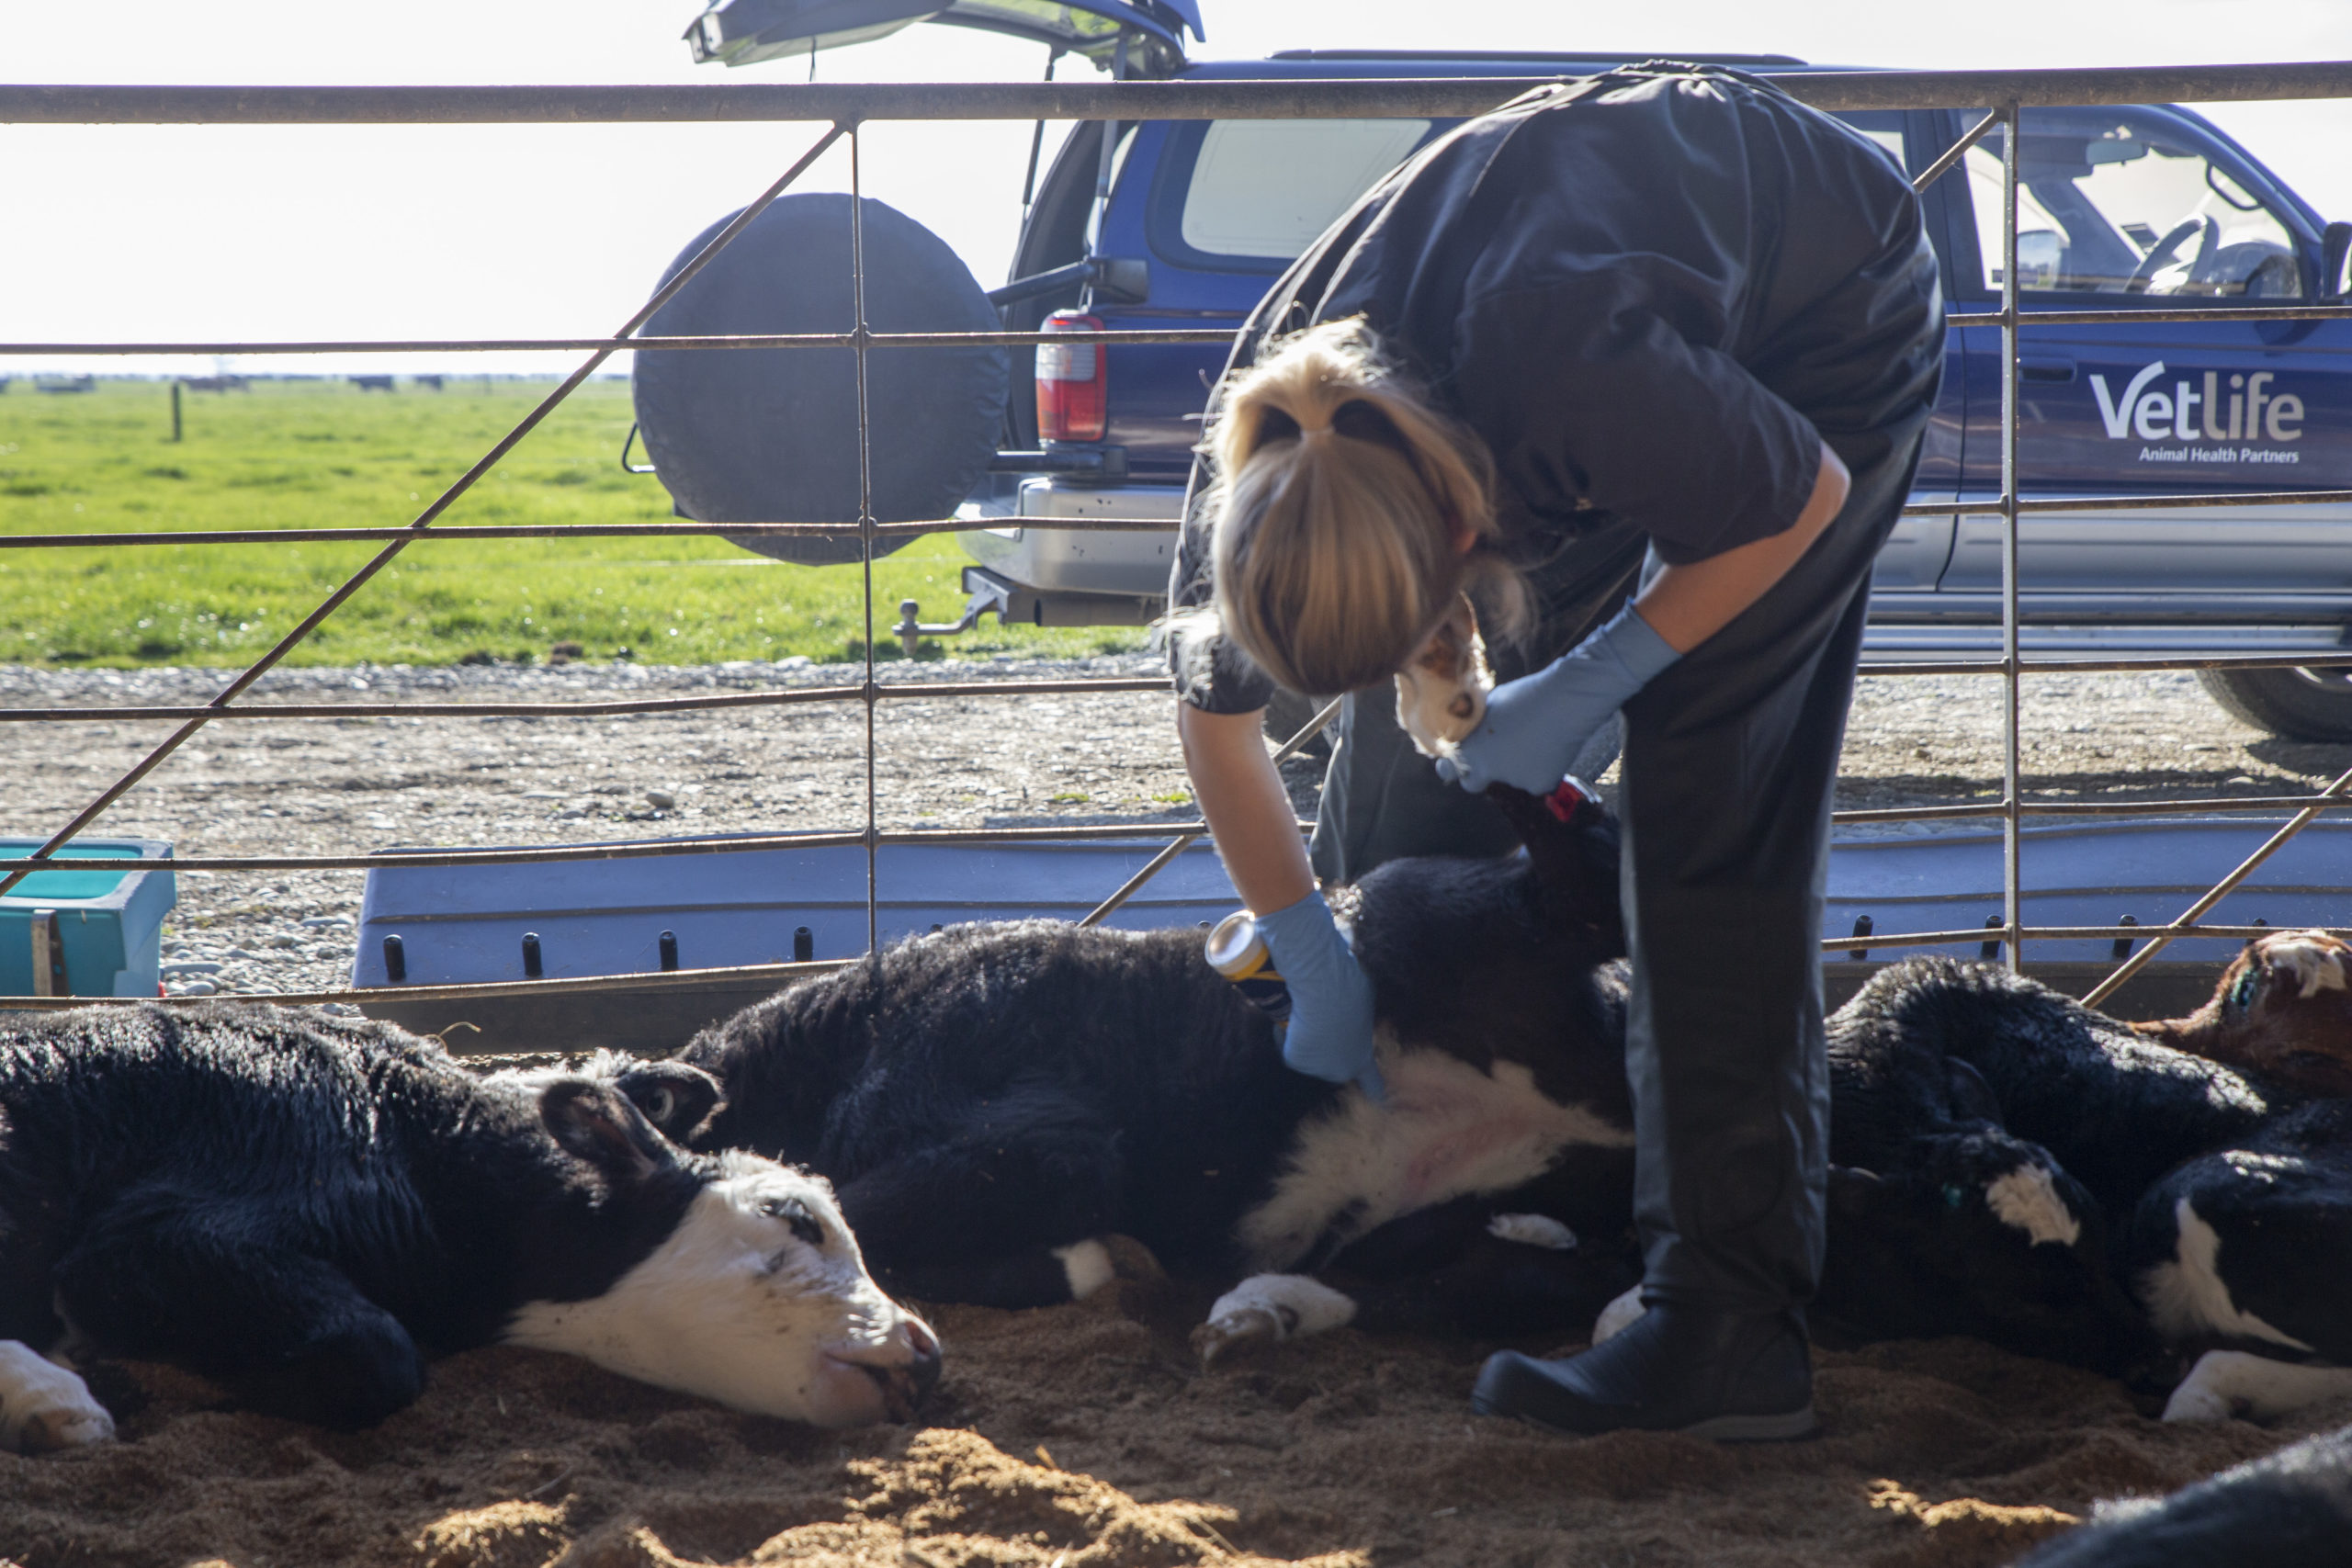 Farm vet teams supporting animal health in Canterbury and Otago